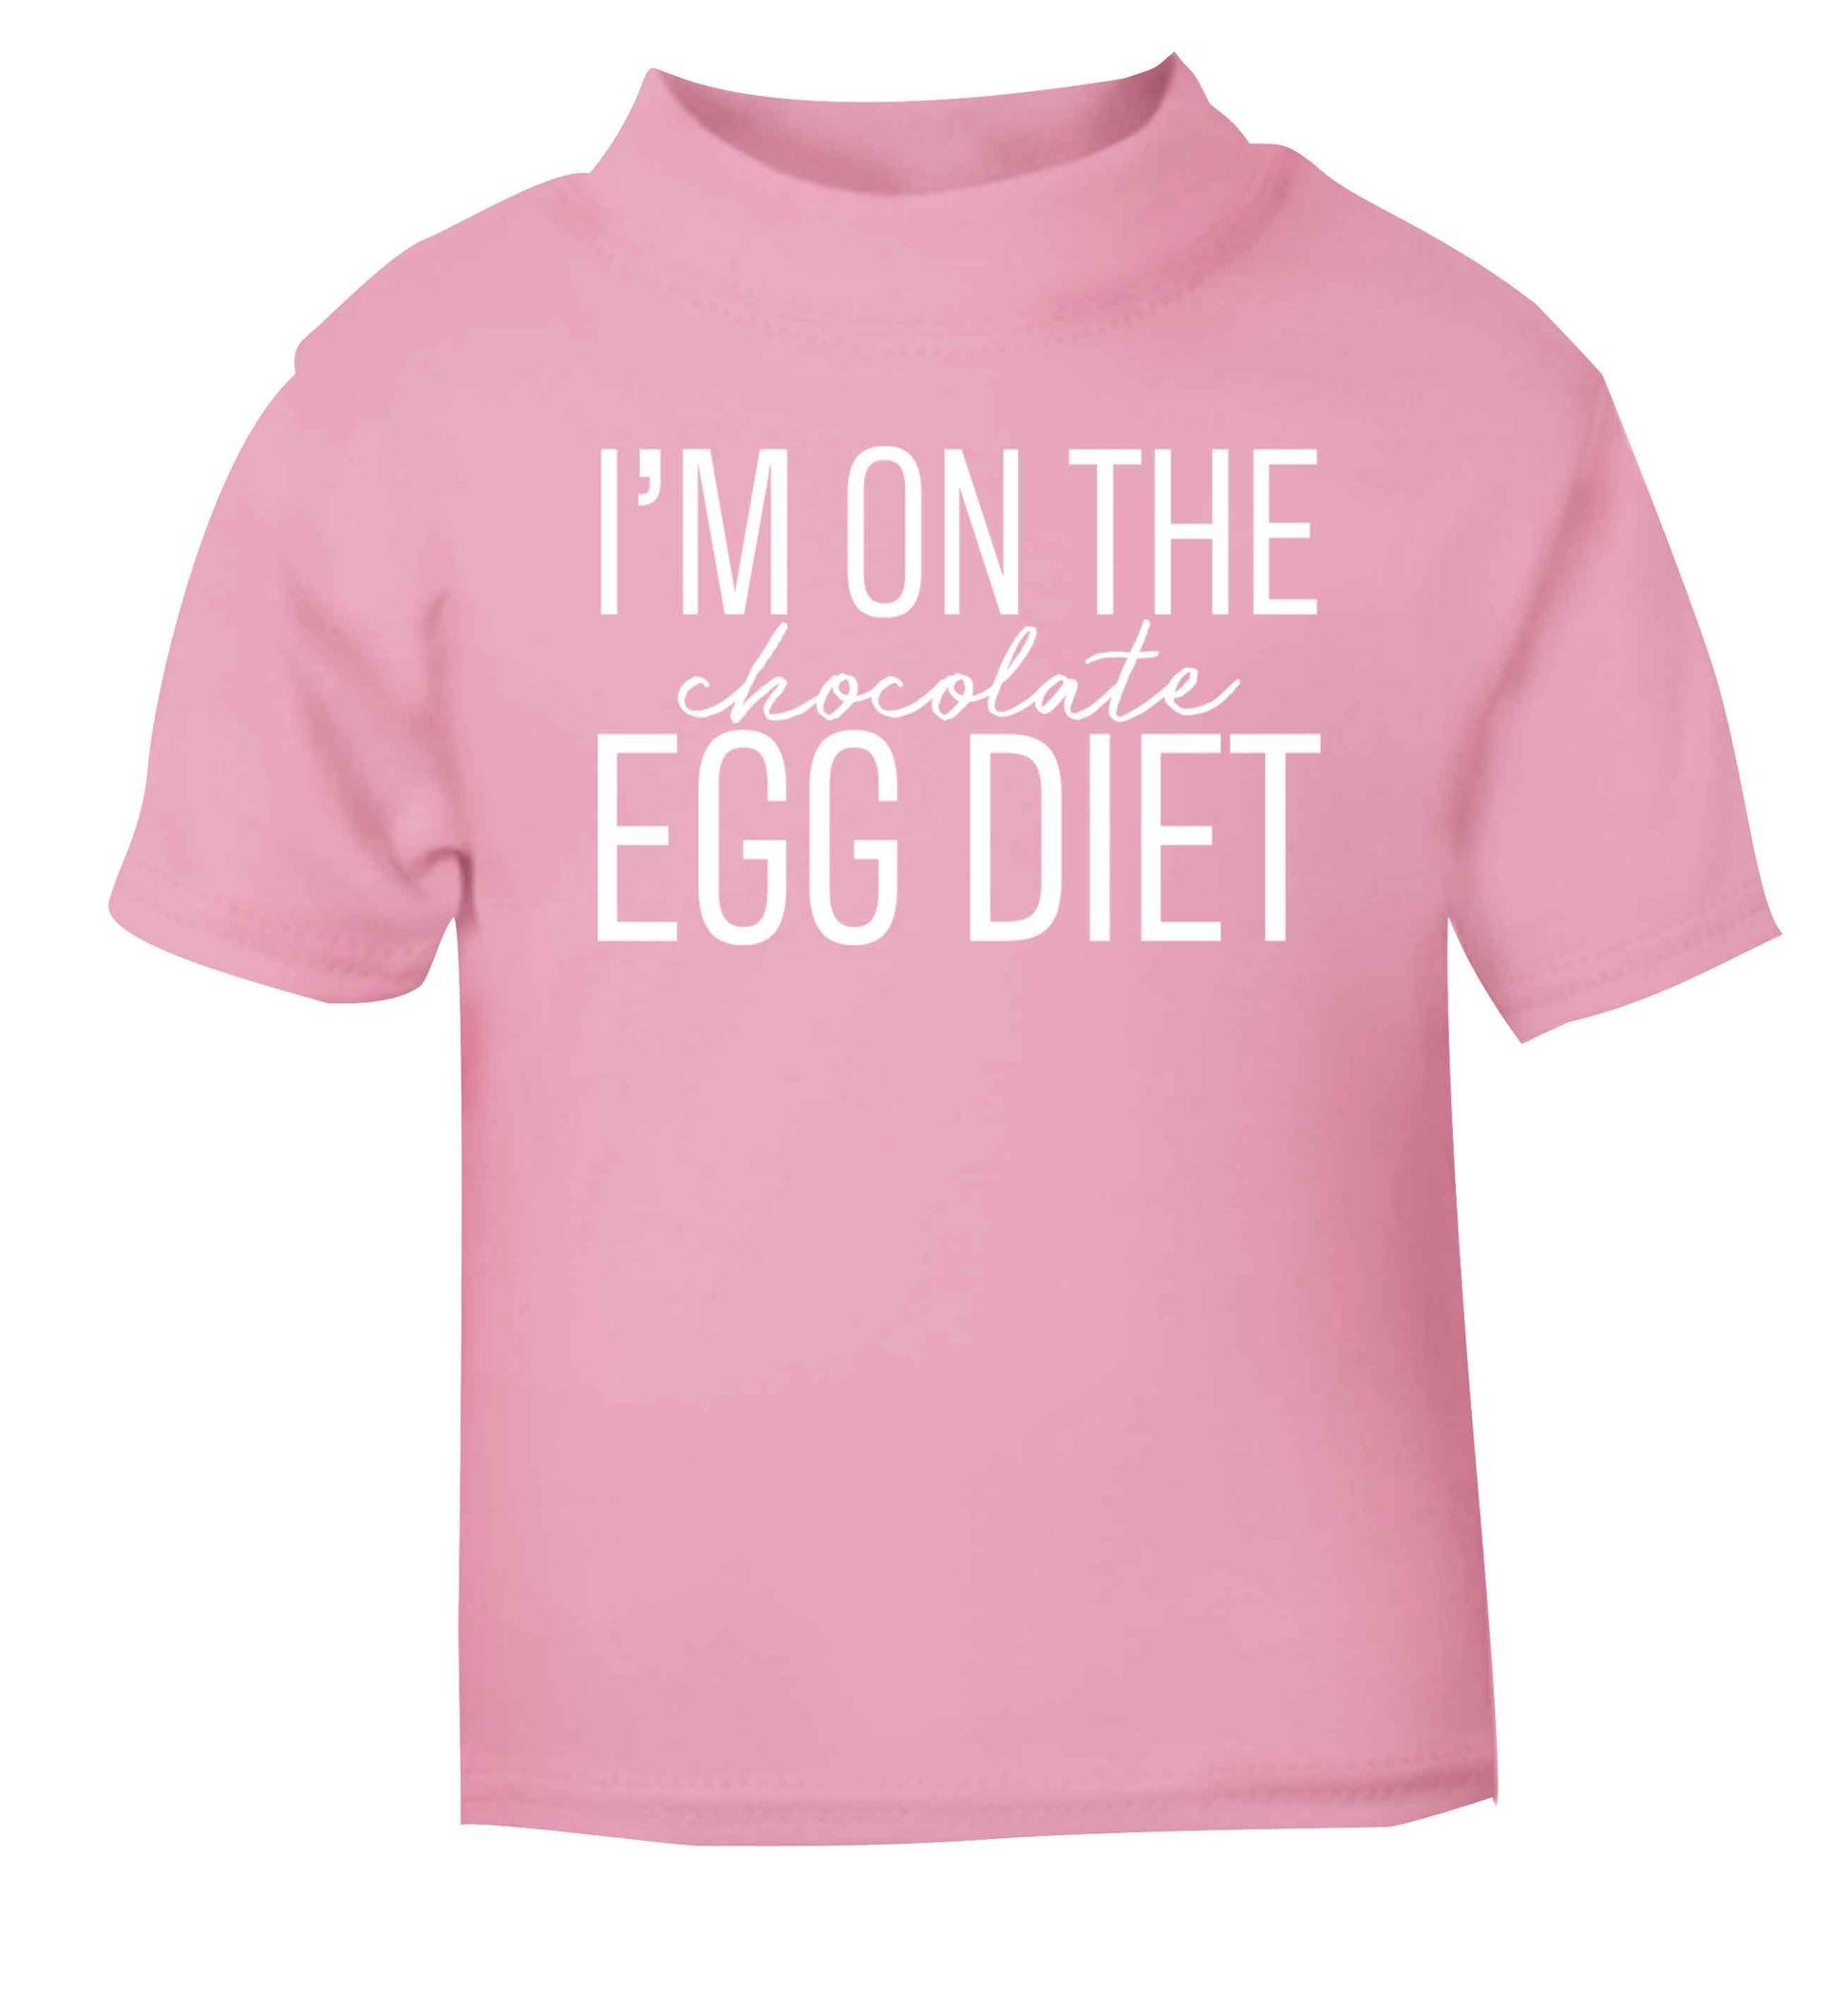 I'm on the chocolate egg diet light pink baby toddler Tshirt 2 Years